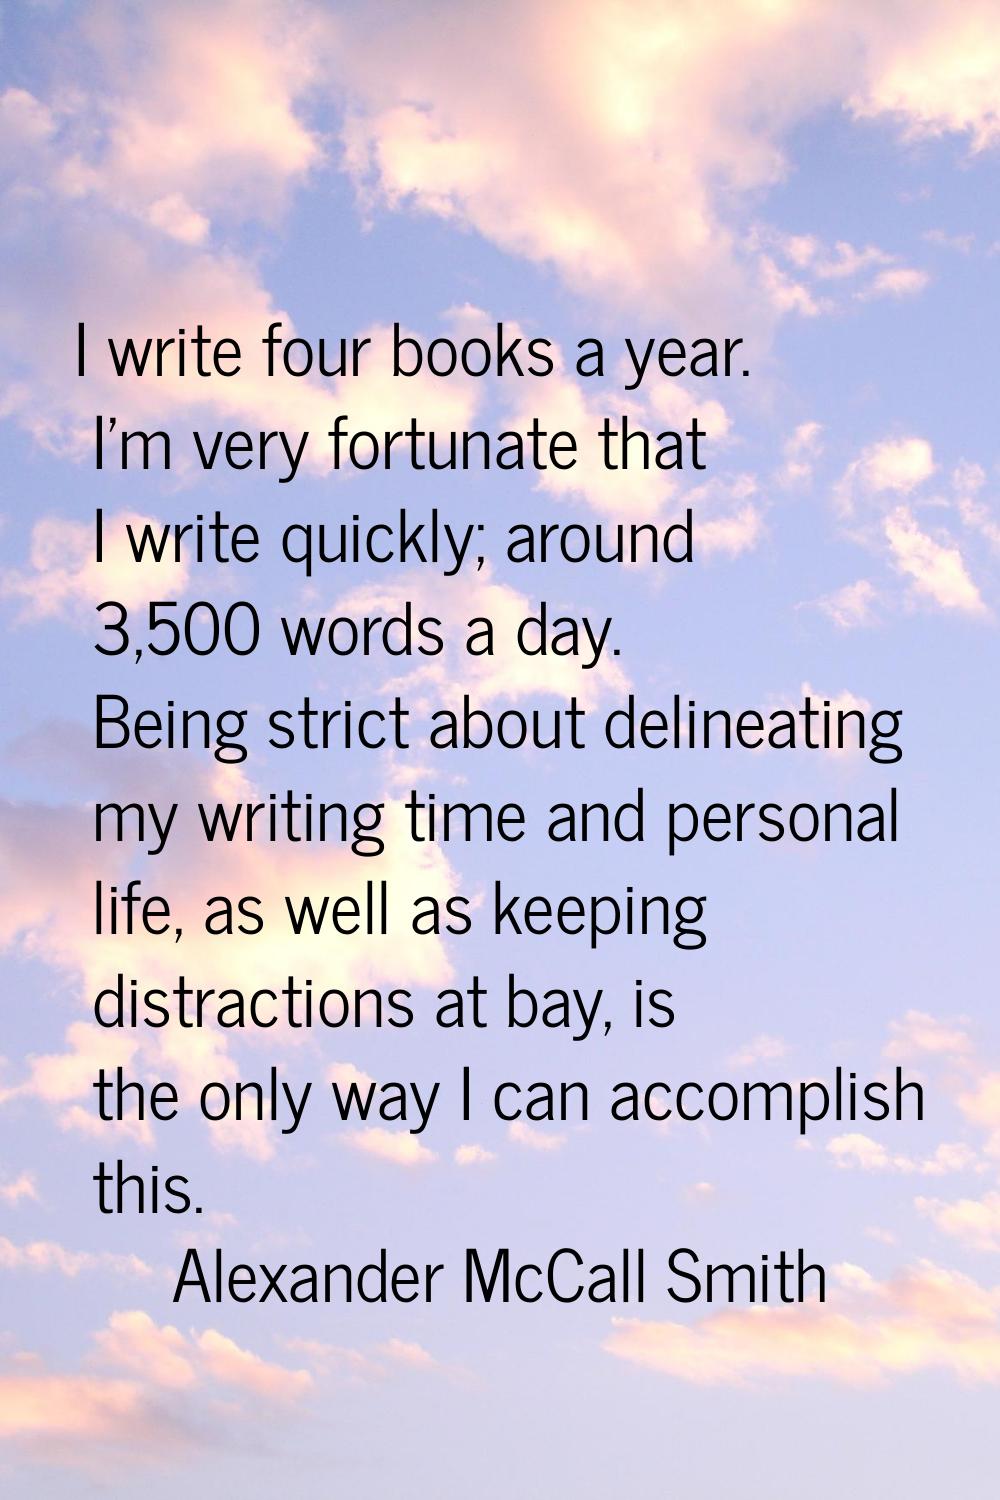 I write four books a year. I'm very fortunate that I write quickly; around 3,500 words a day. Being